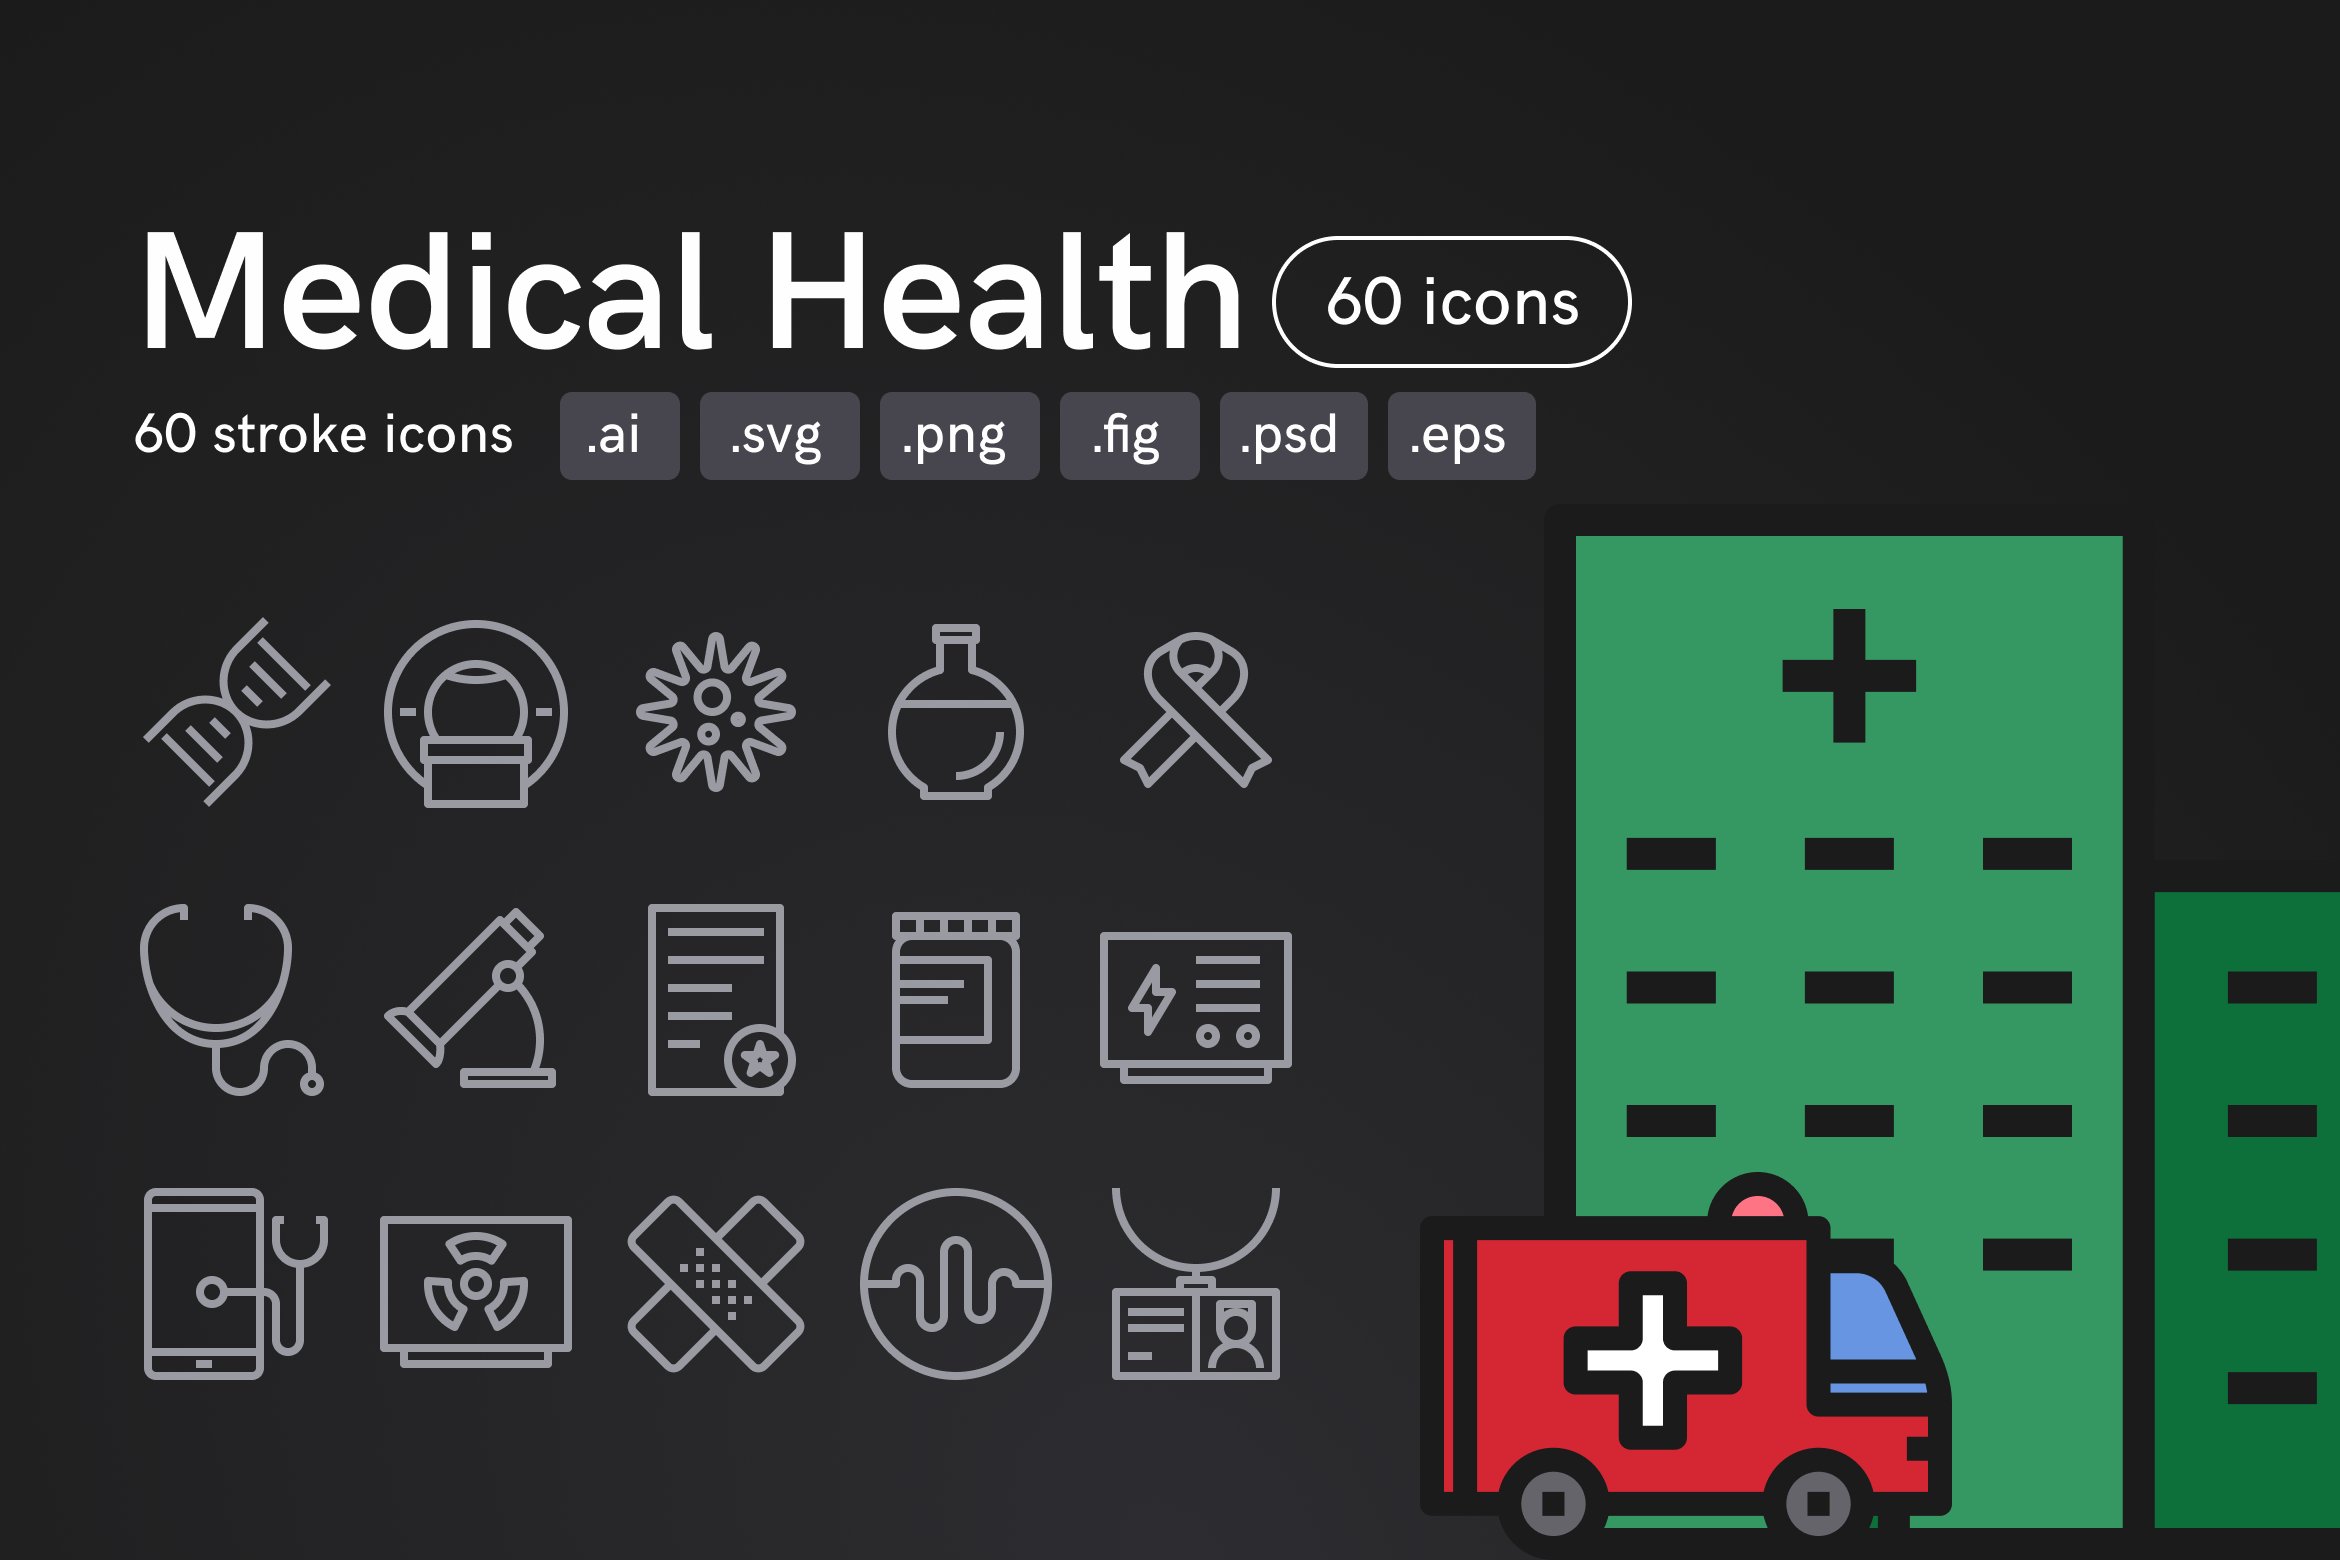 Medical Health Icons cover image.